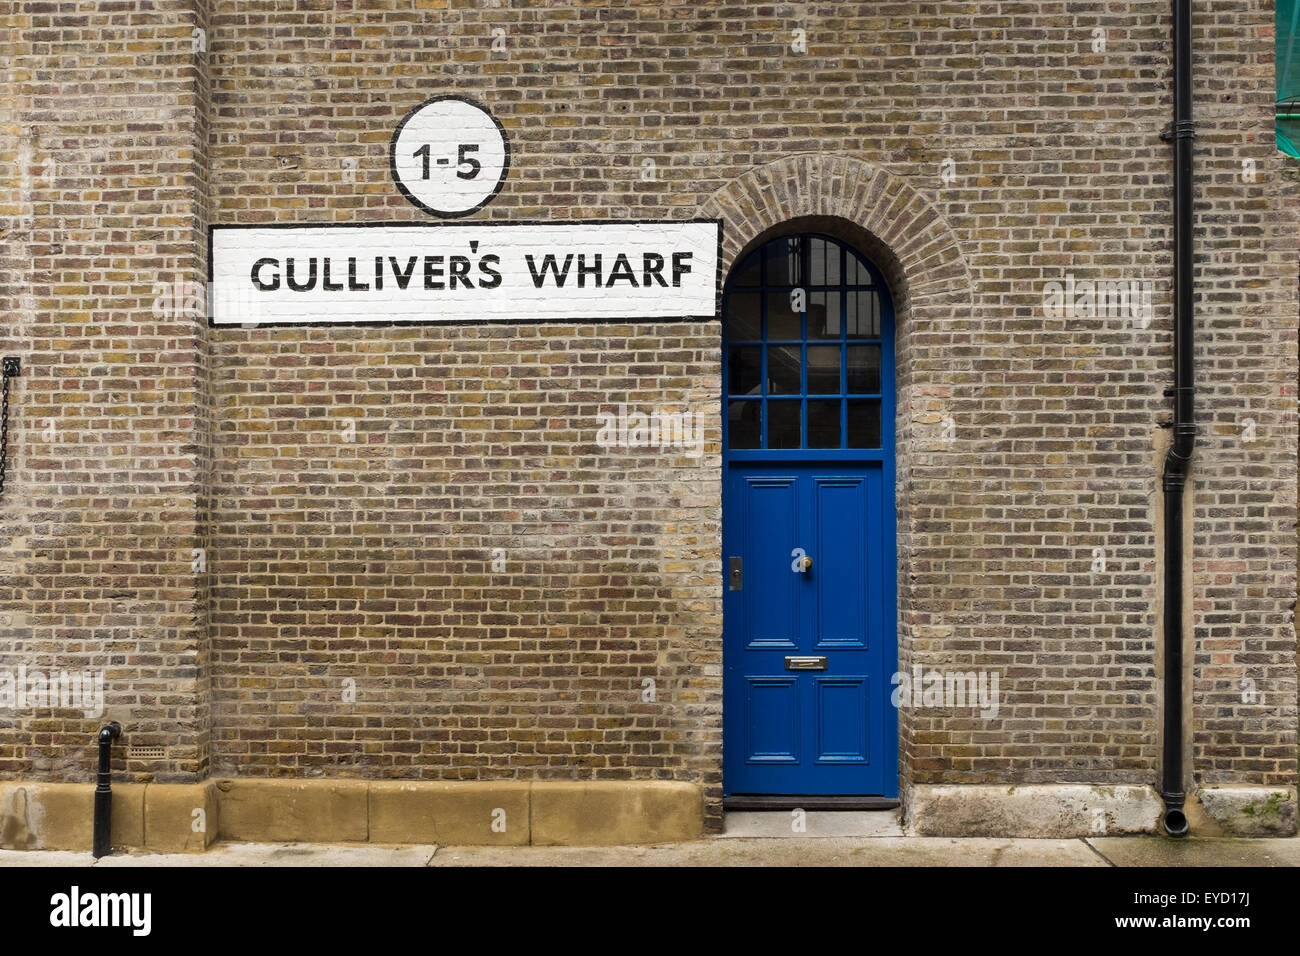 Gulliver's Wharf, luxury flats converted from former warehouse in Wapping, London, UK Stock Photo